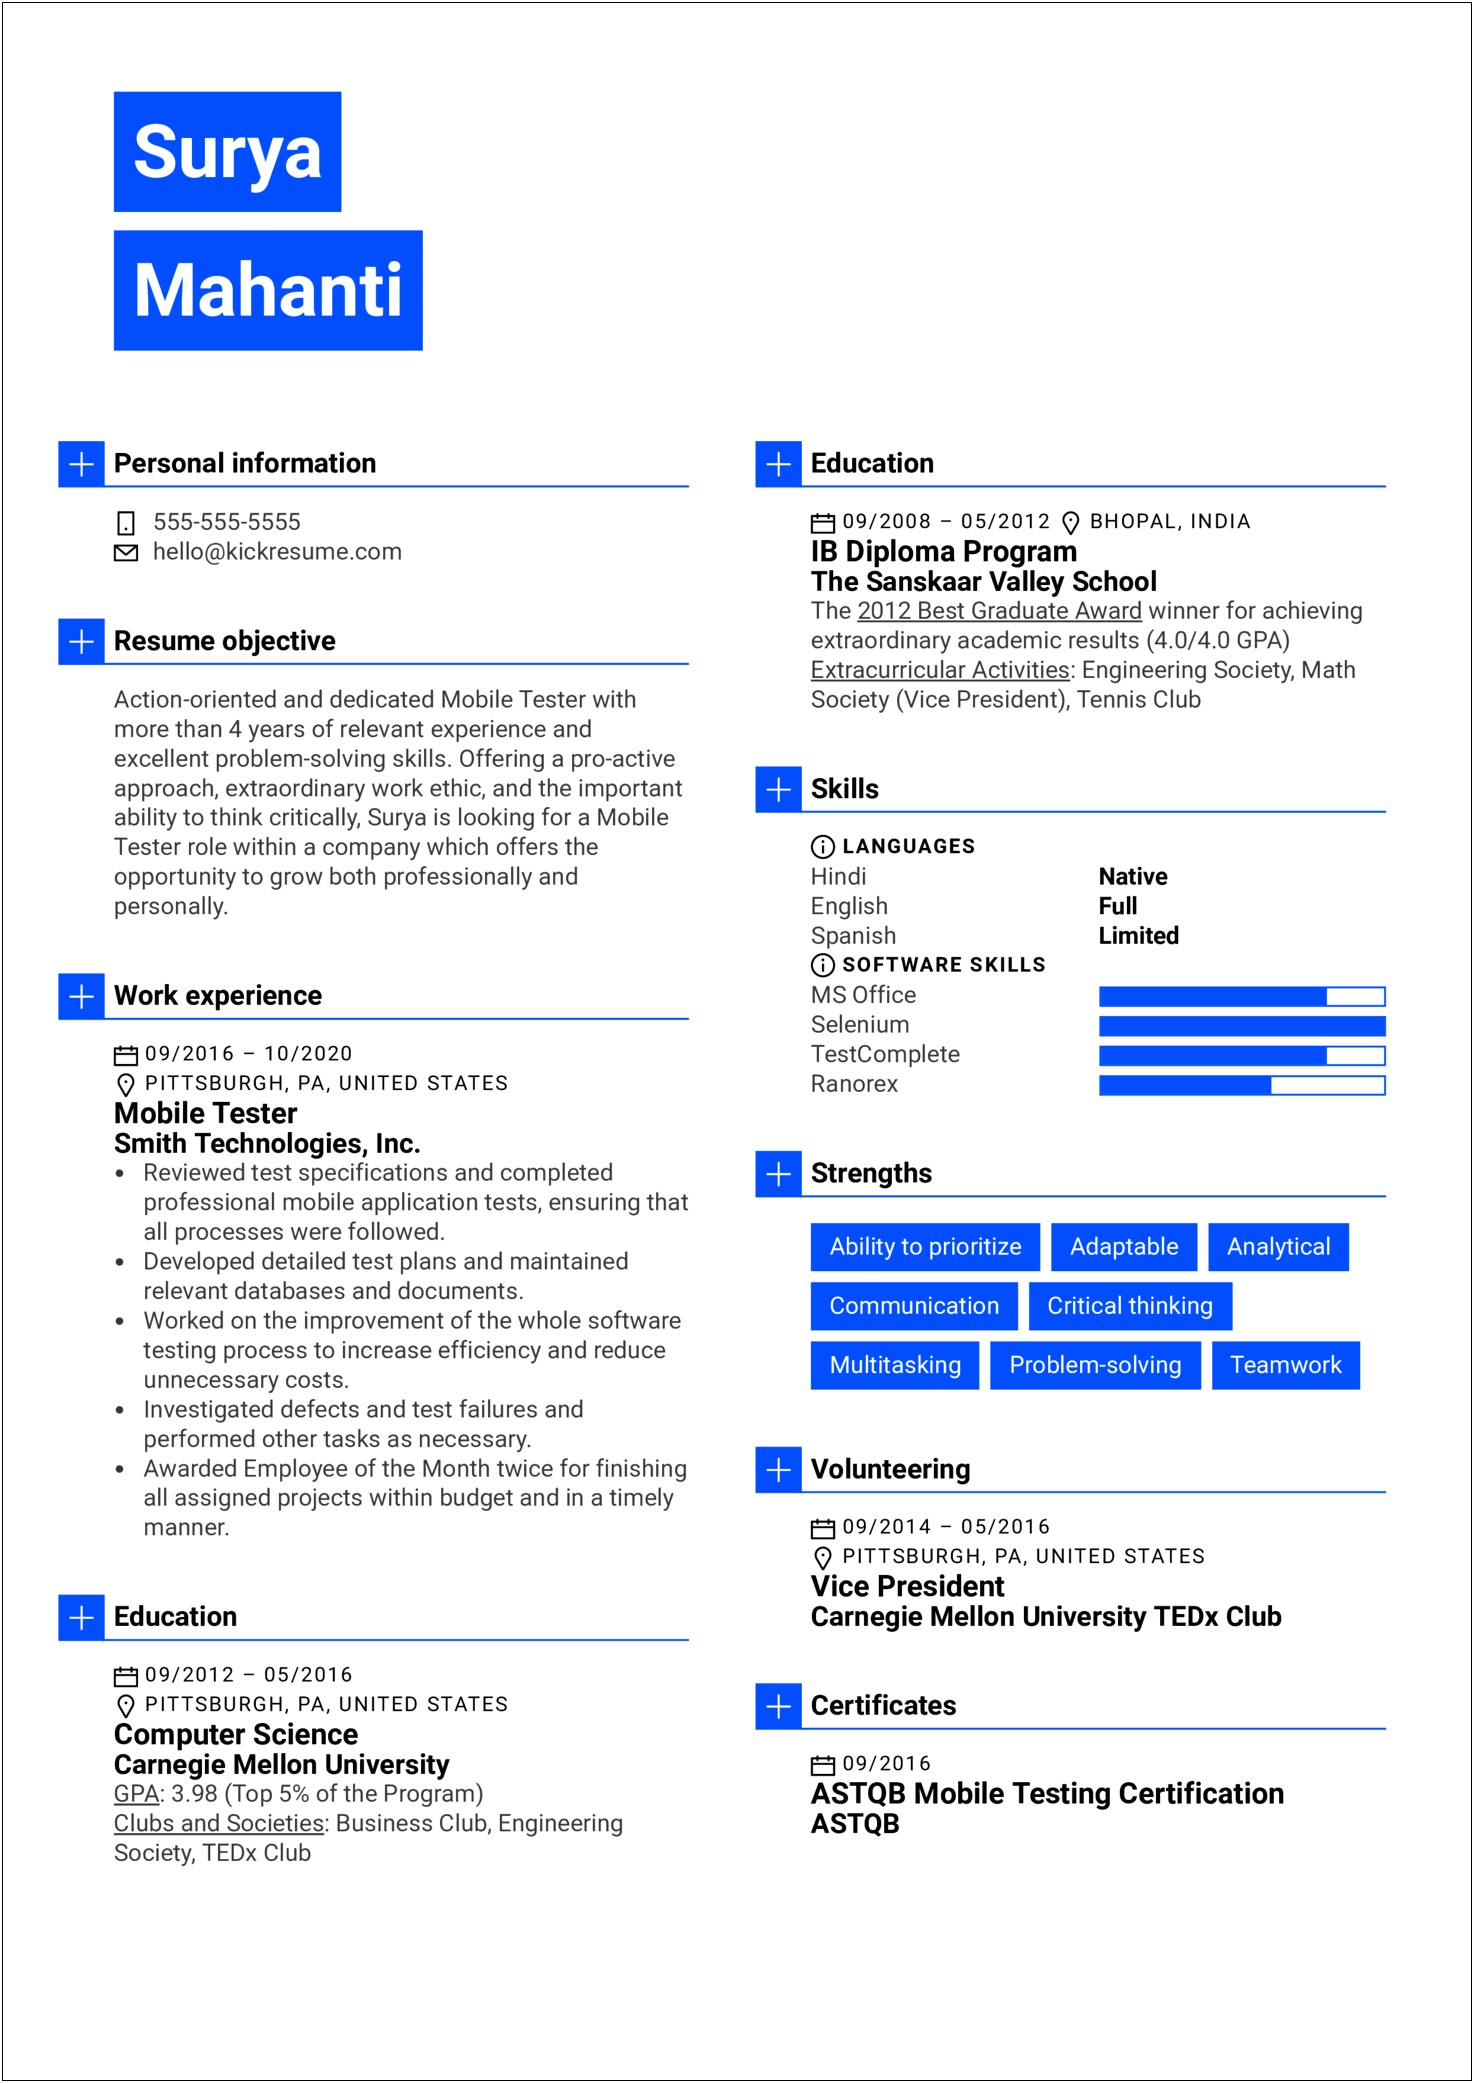 Sample Resume For Ms In Us Computer Science